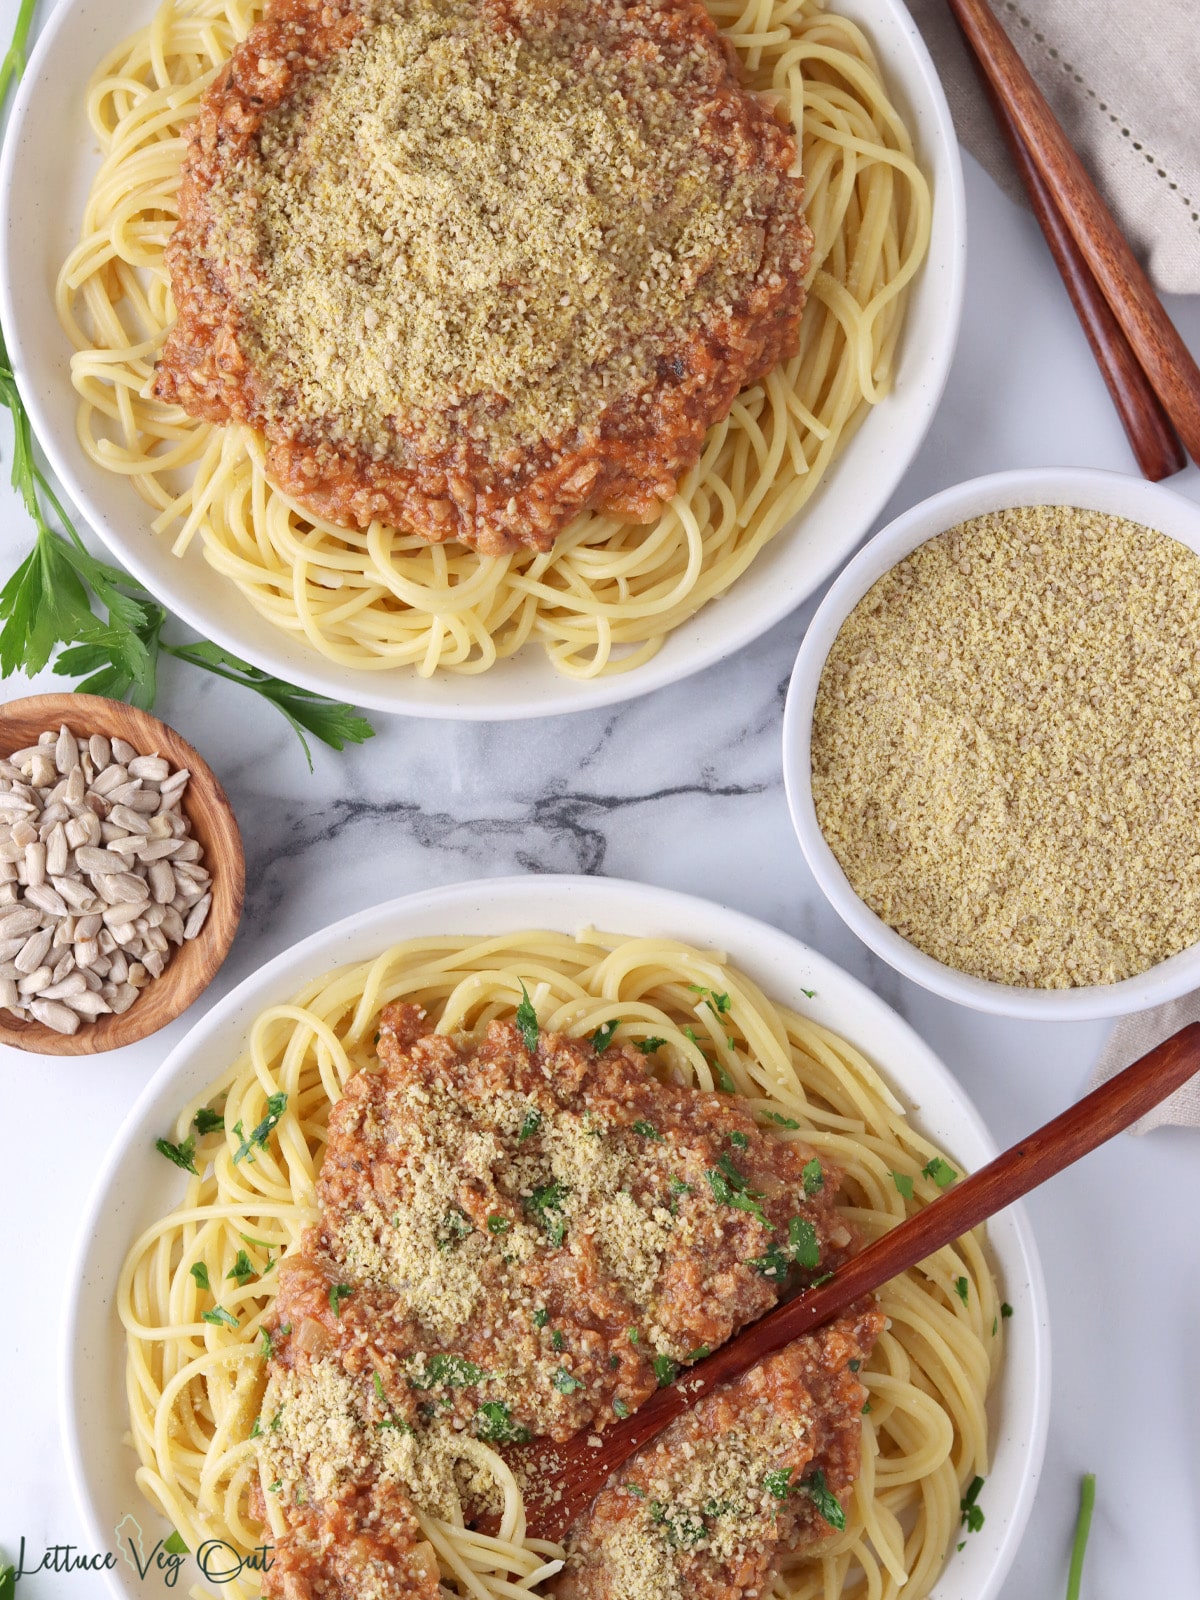 Two plates of spaghetti topped with tomato sauce and sunflower seed parmesan, next to dish of sunflower seeds and dish of sunflower parm.